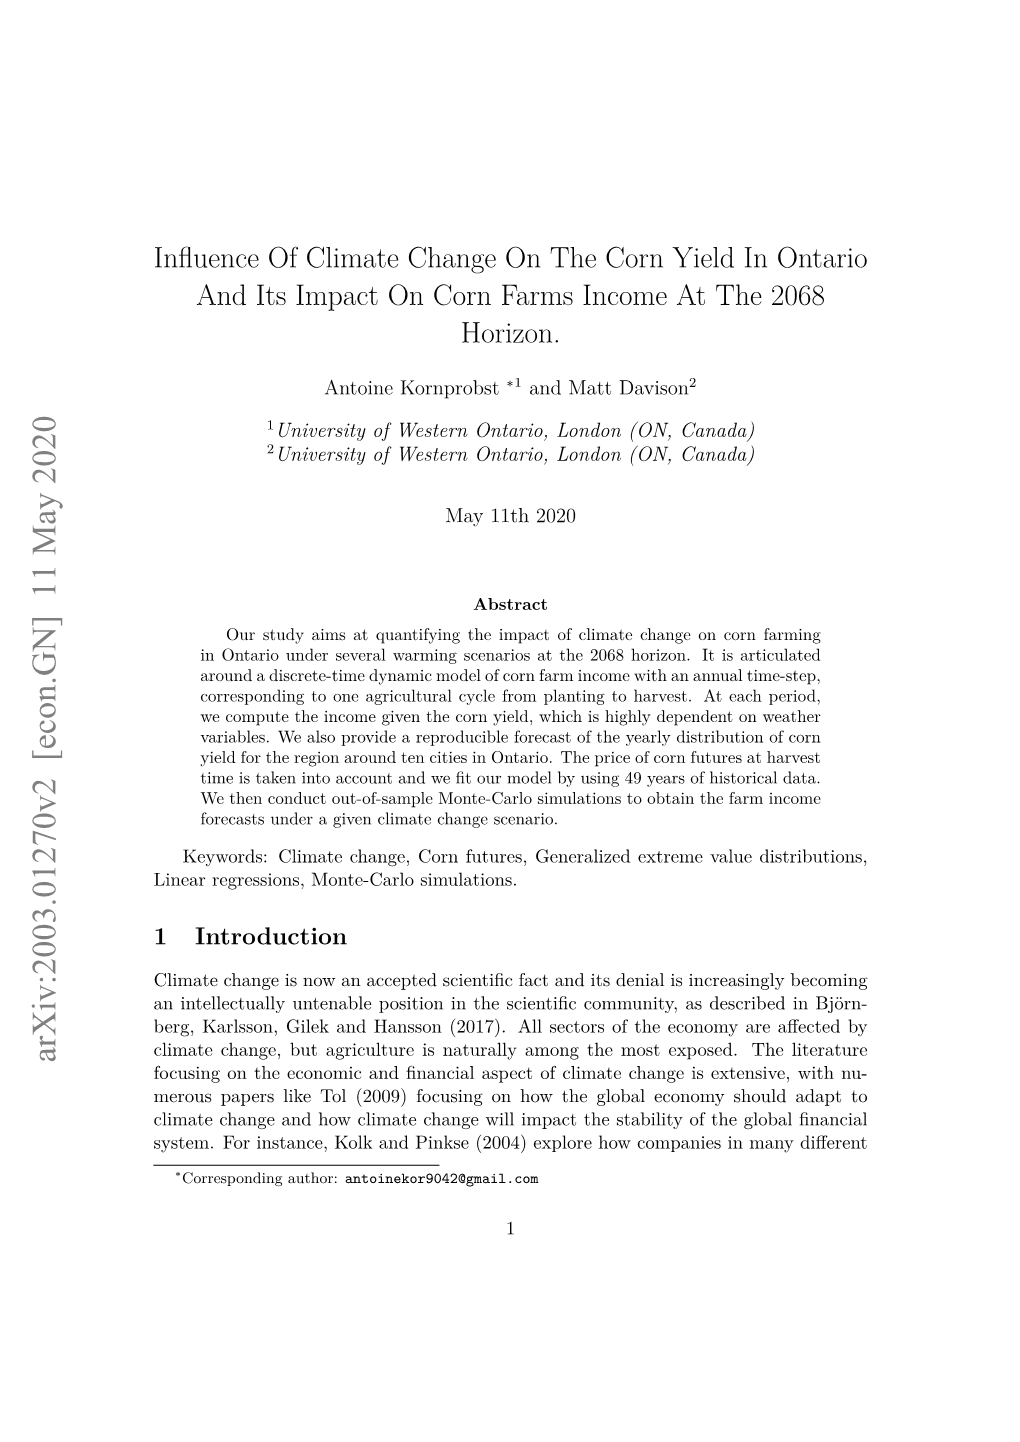 Influence of Climate Change on the Corn Yield in Ontario and Its Impact